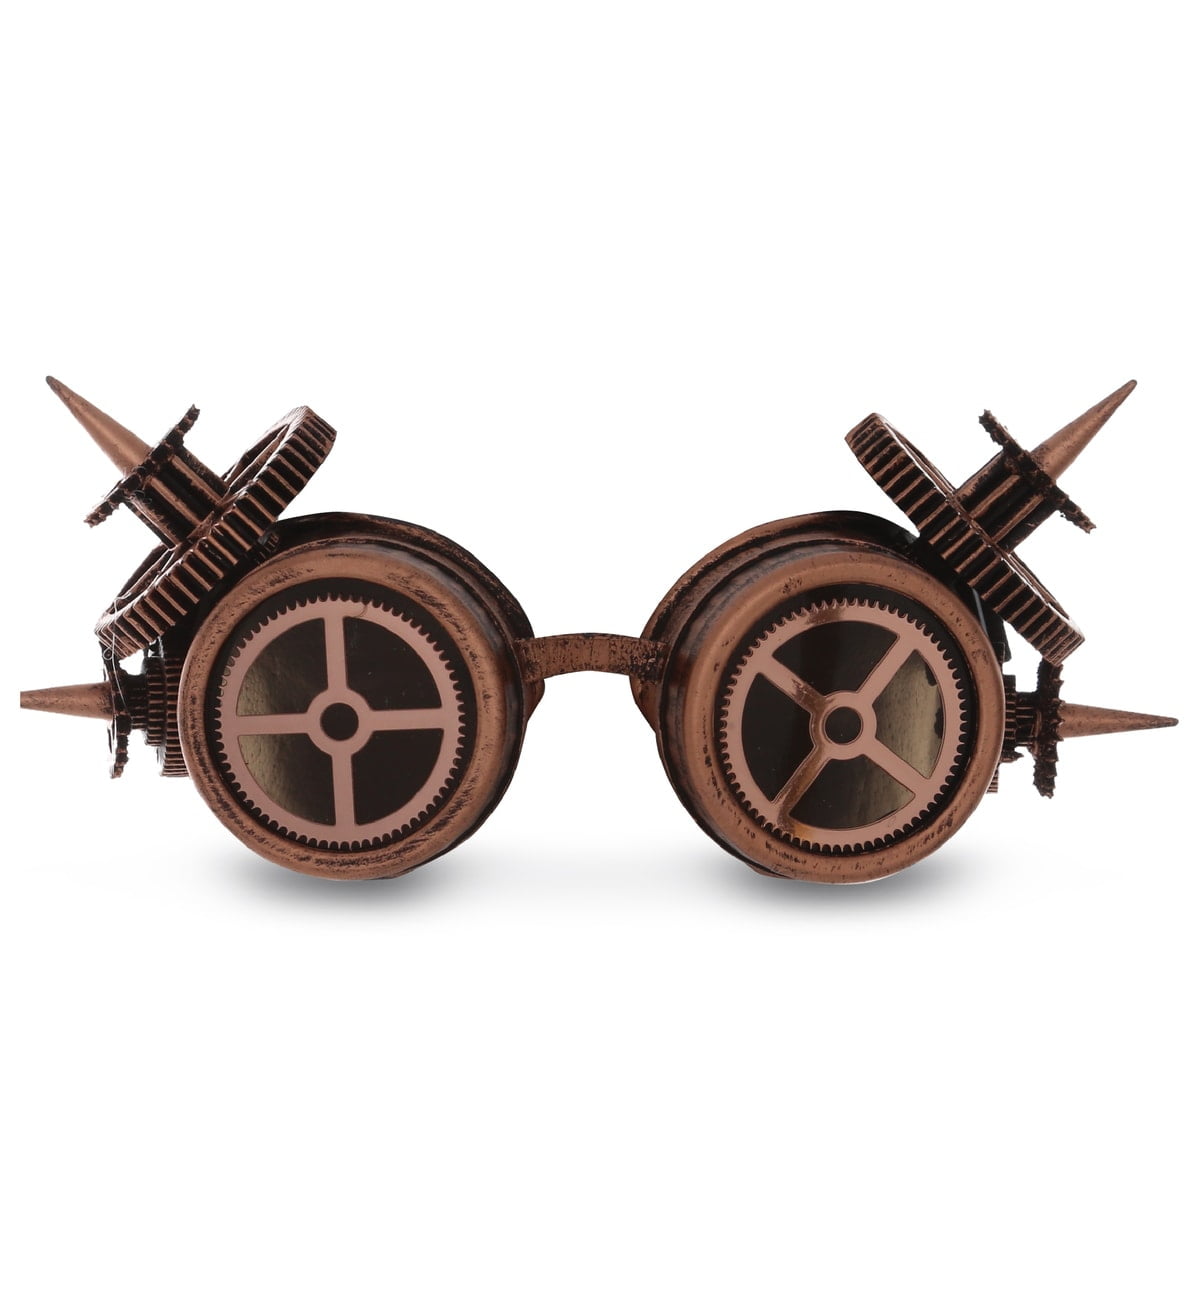 Sayfut Vintage Red Copper Steampunk Goggles with Double Ocular Loupe Retro Rivet PuSAYFUT Gothic Cosplay Goggles Glasses Eyewear, Adult Unisex, Size